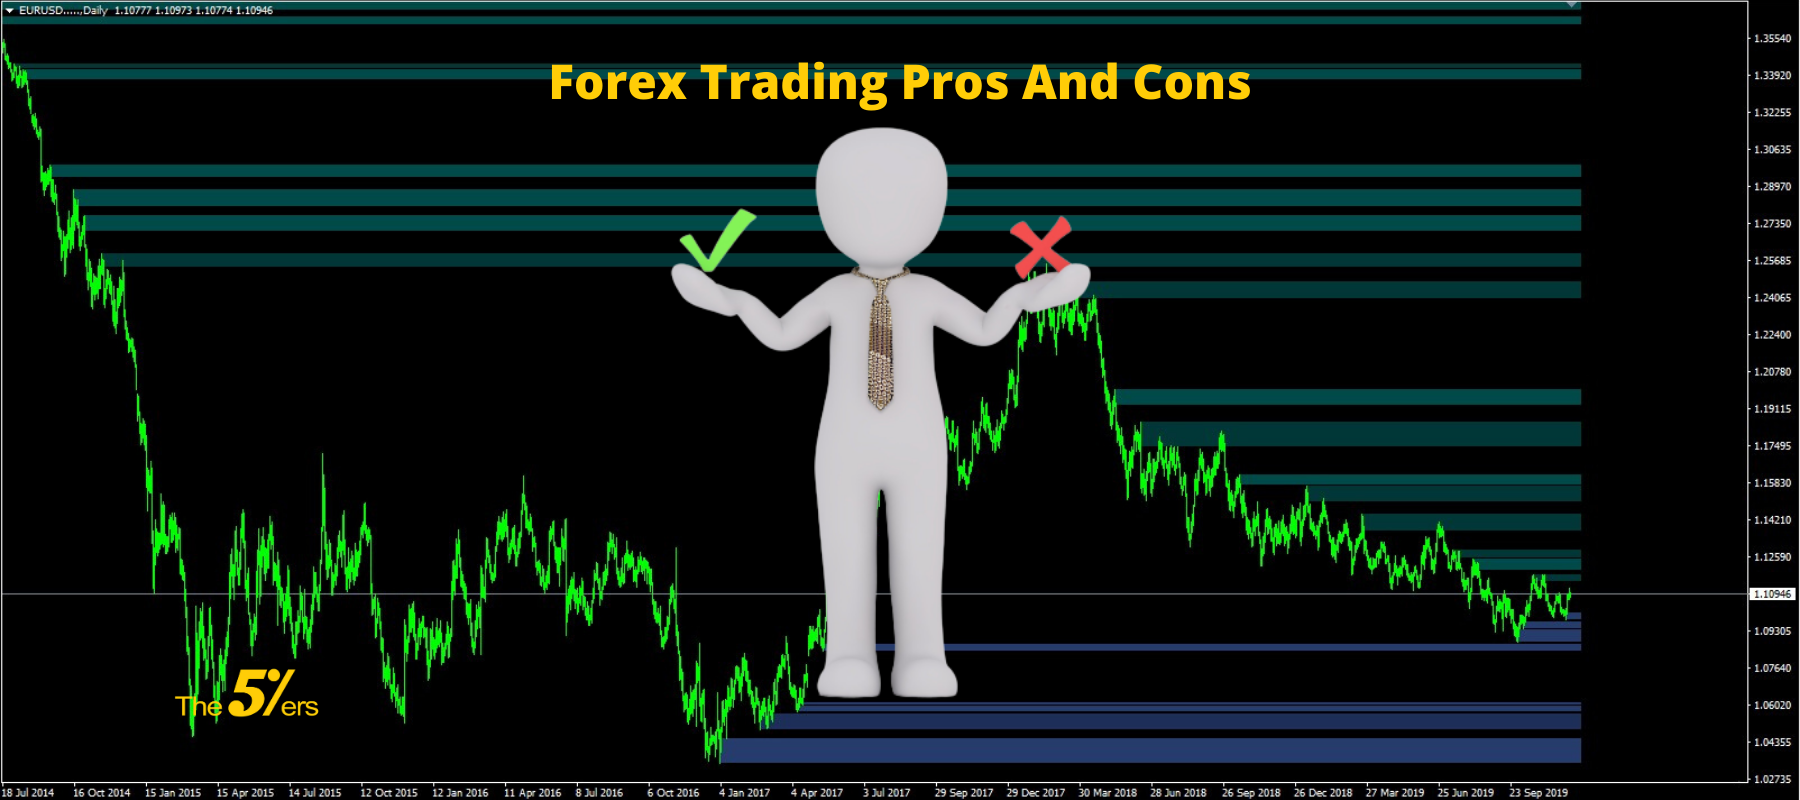 Forex pros and cons